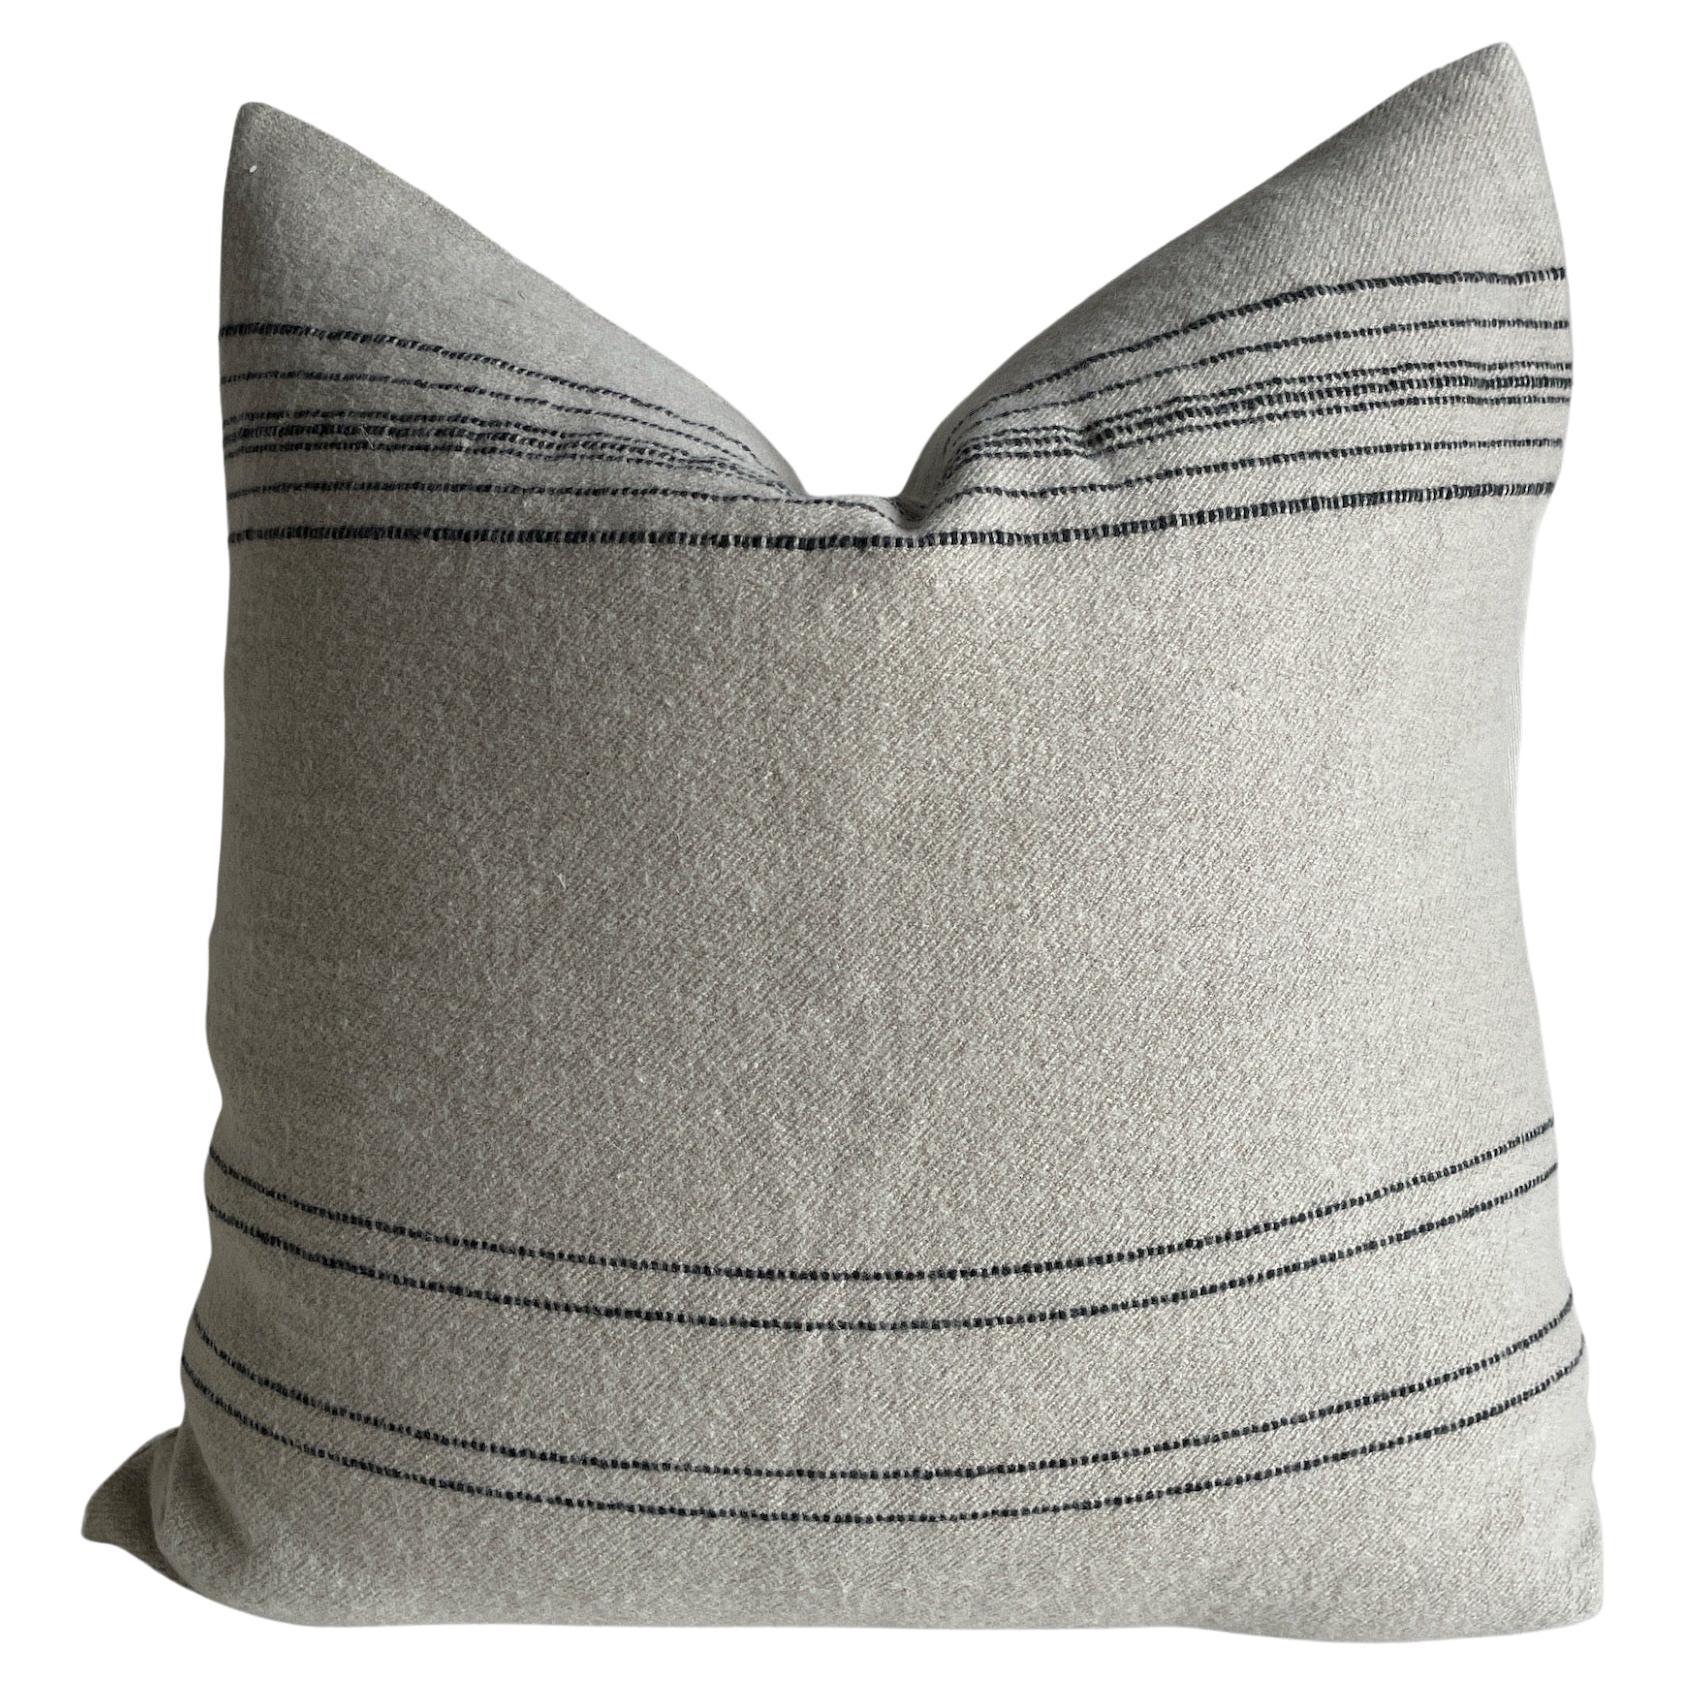 Belgian Linen and Wool Oversize Pillow Cover in Oatmeal and Coal with Insert